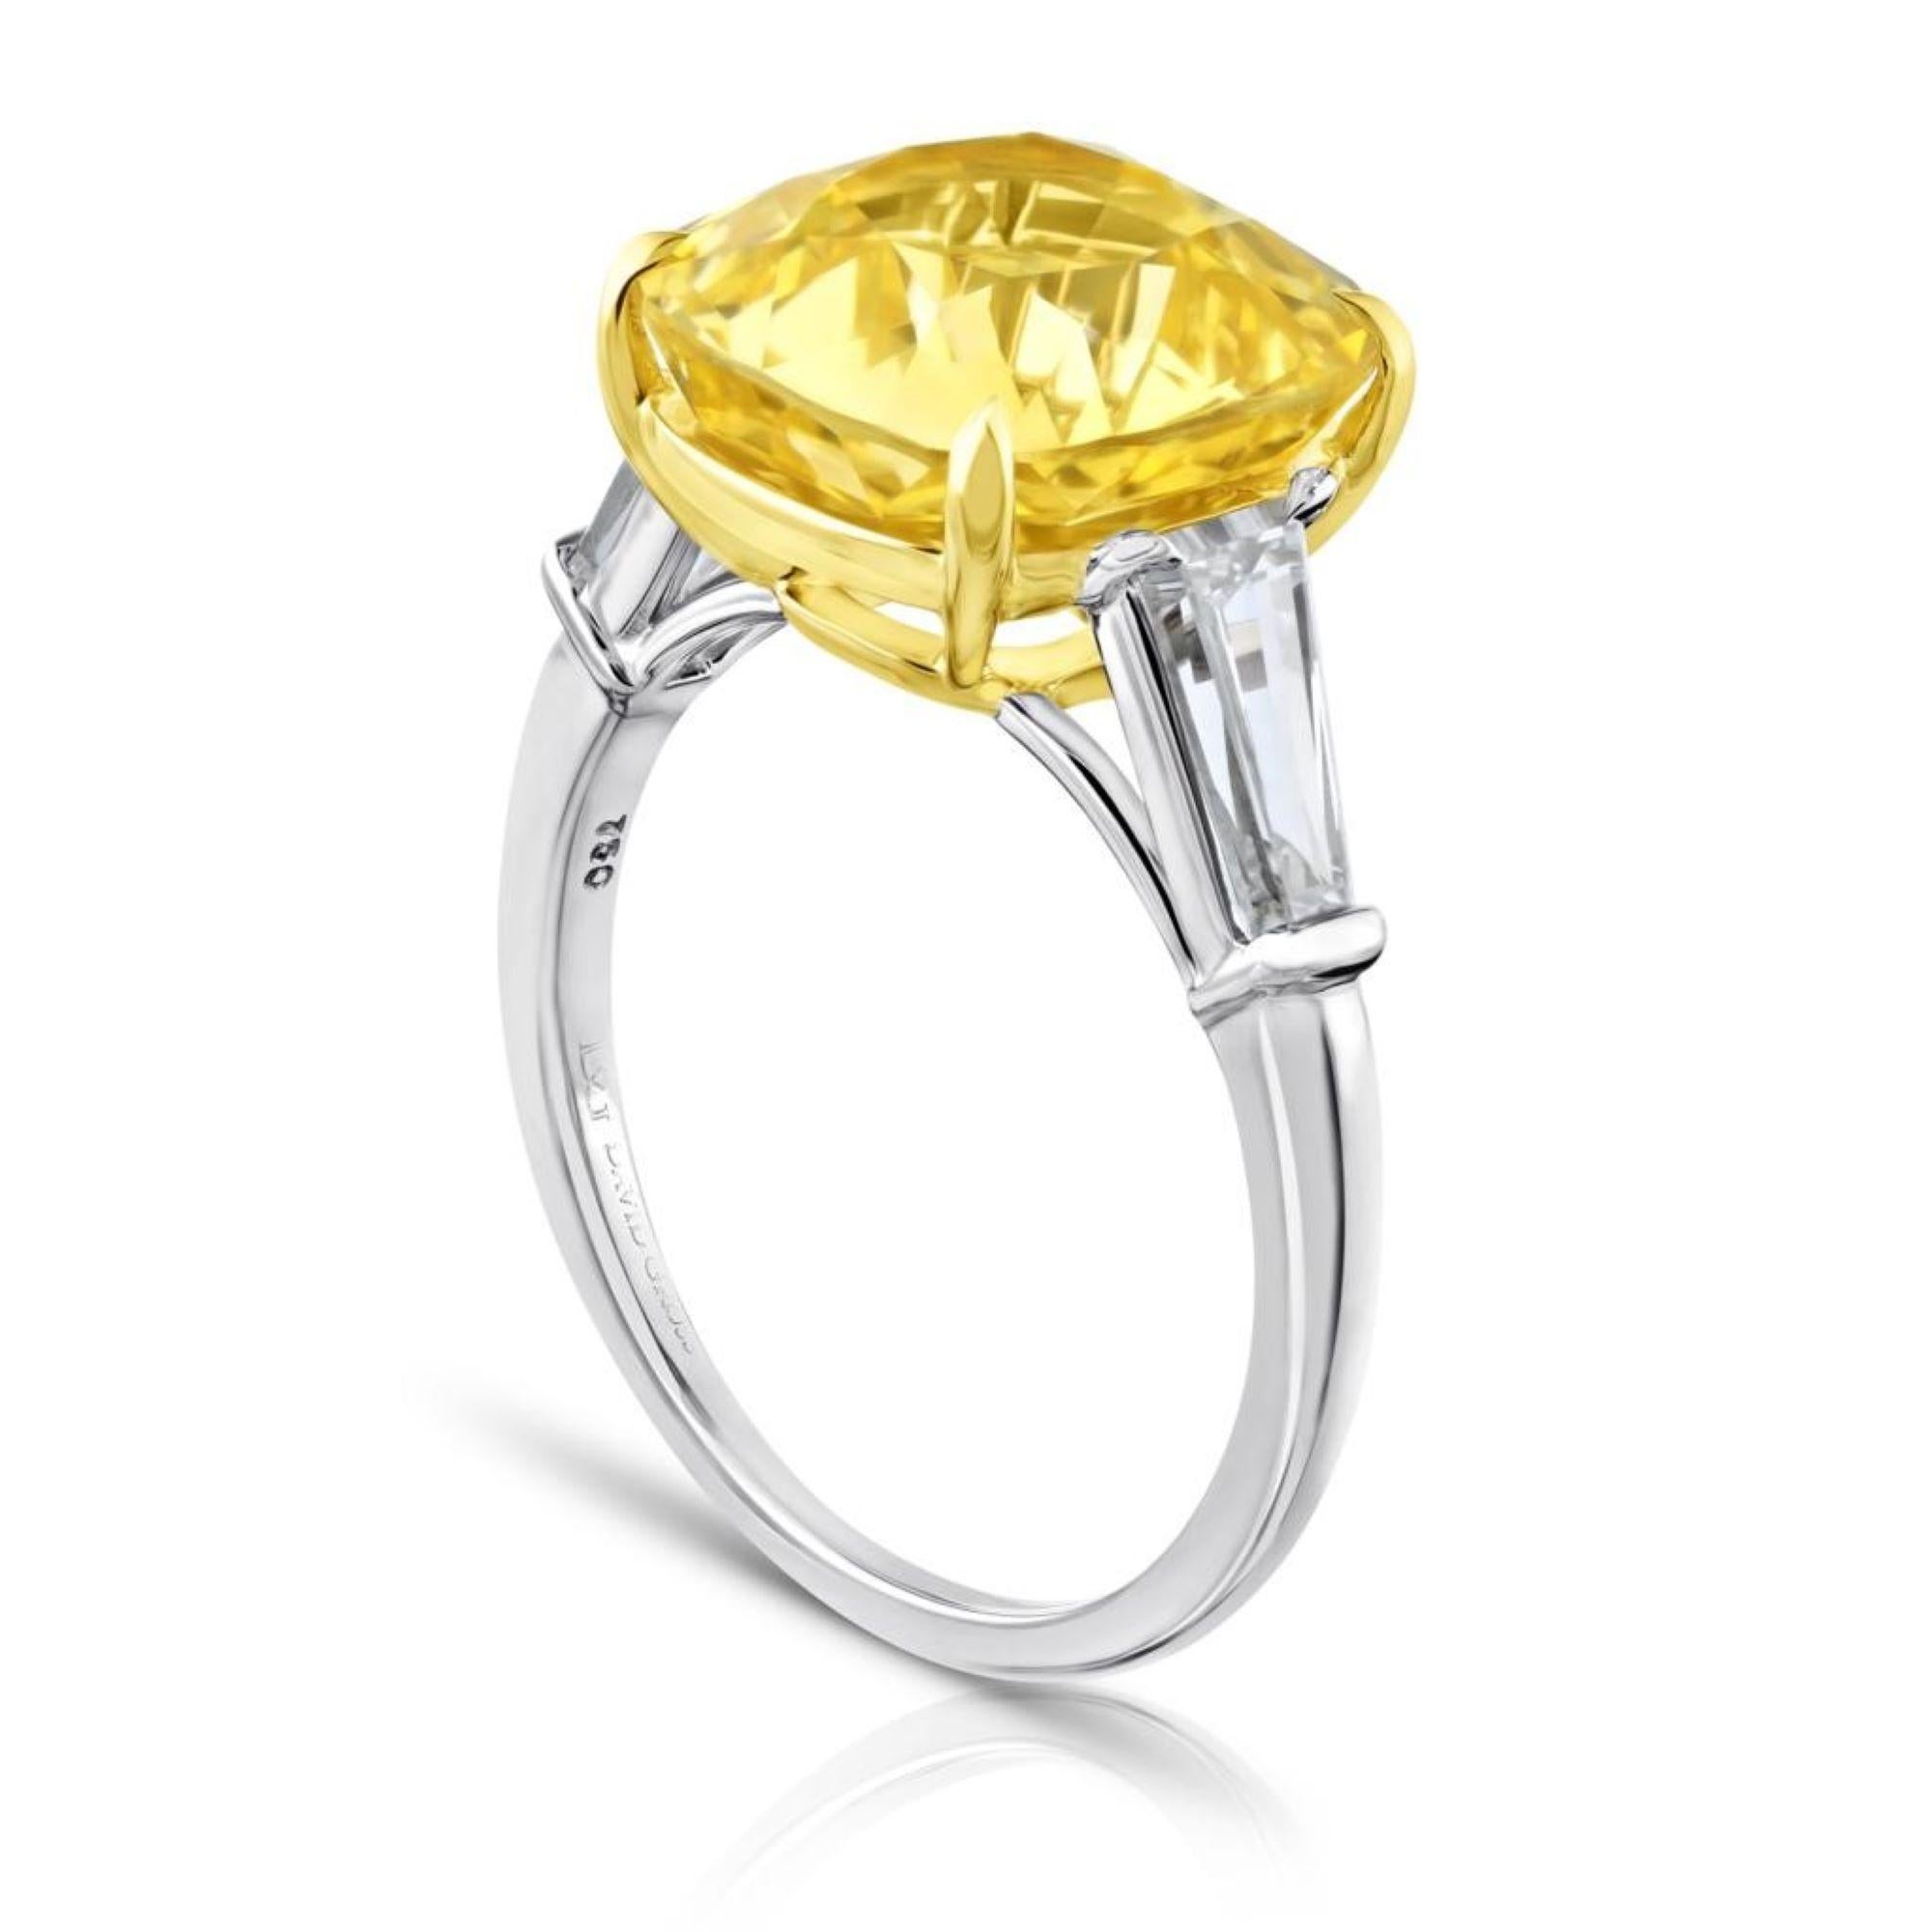 7.54 carat Cushion Yellow  Sapphire with Pear Diamonds .65 carats set in a Platinum ring